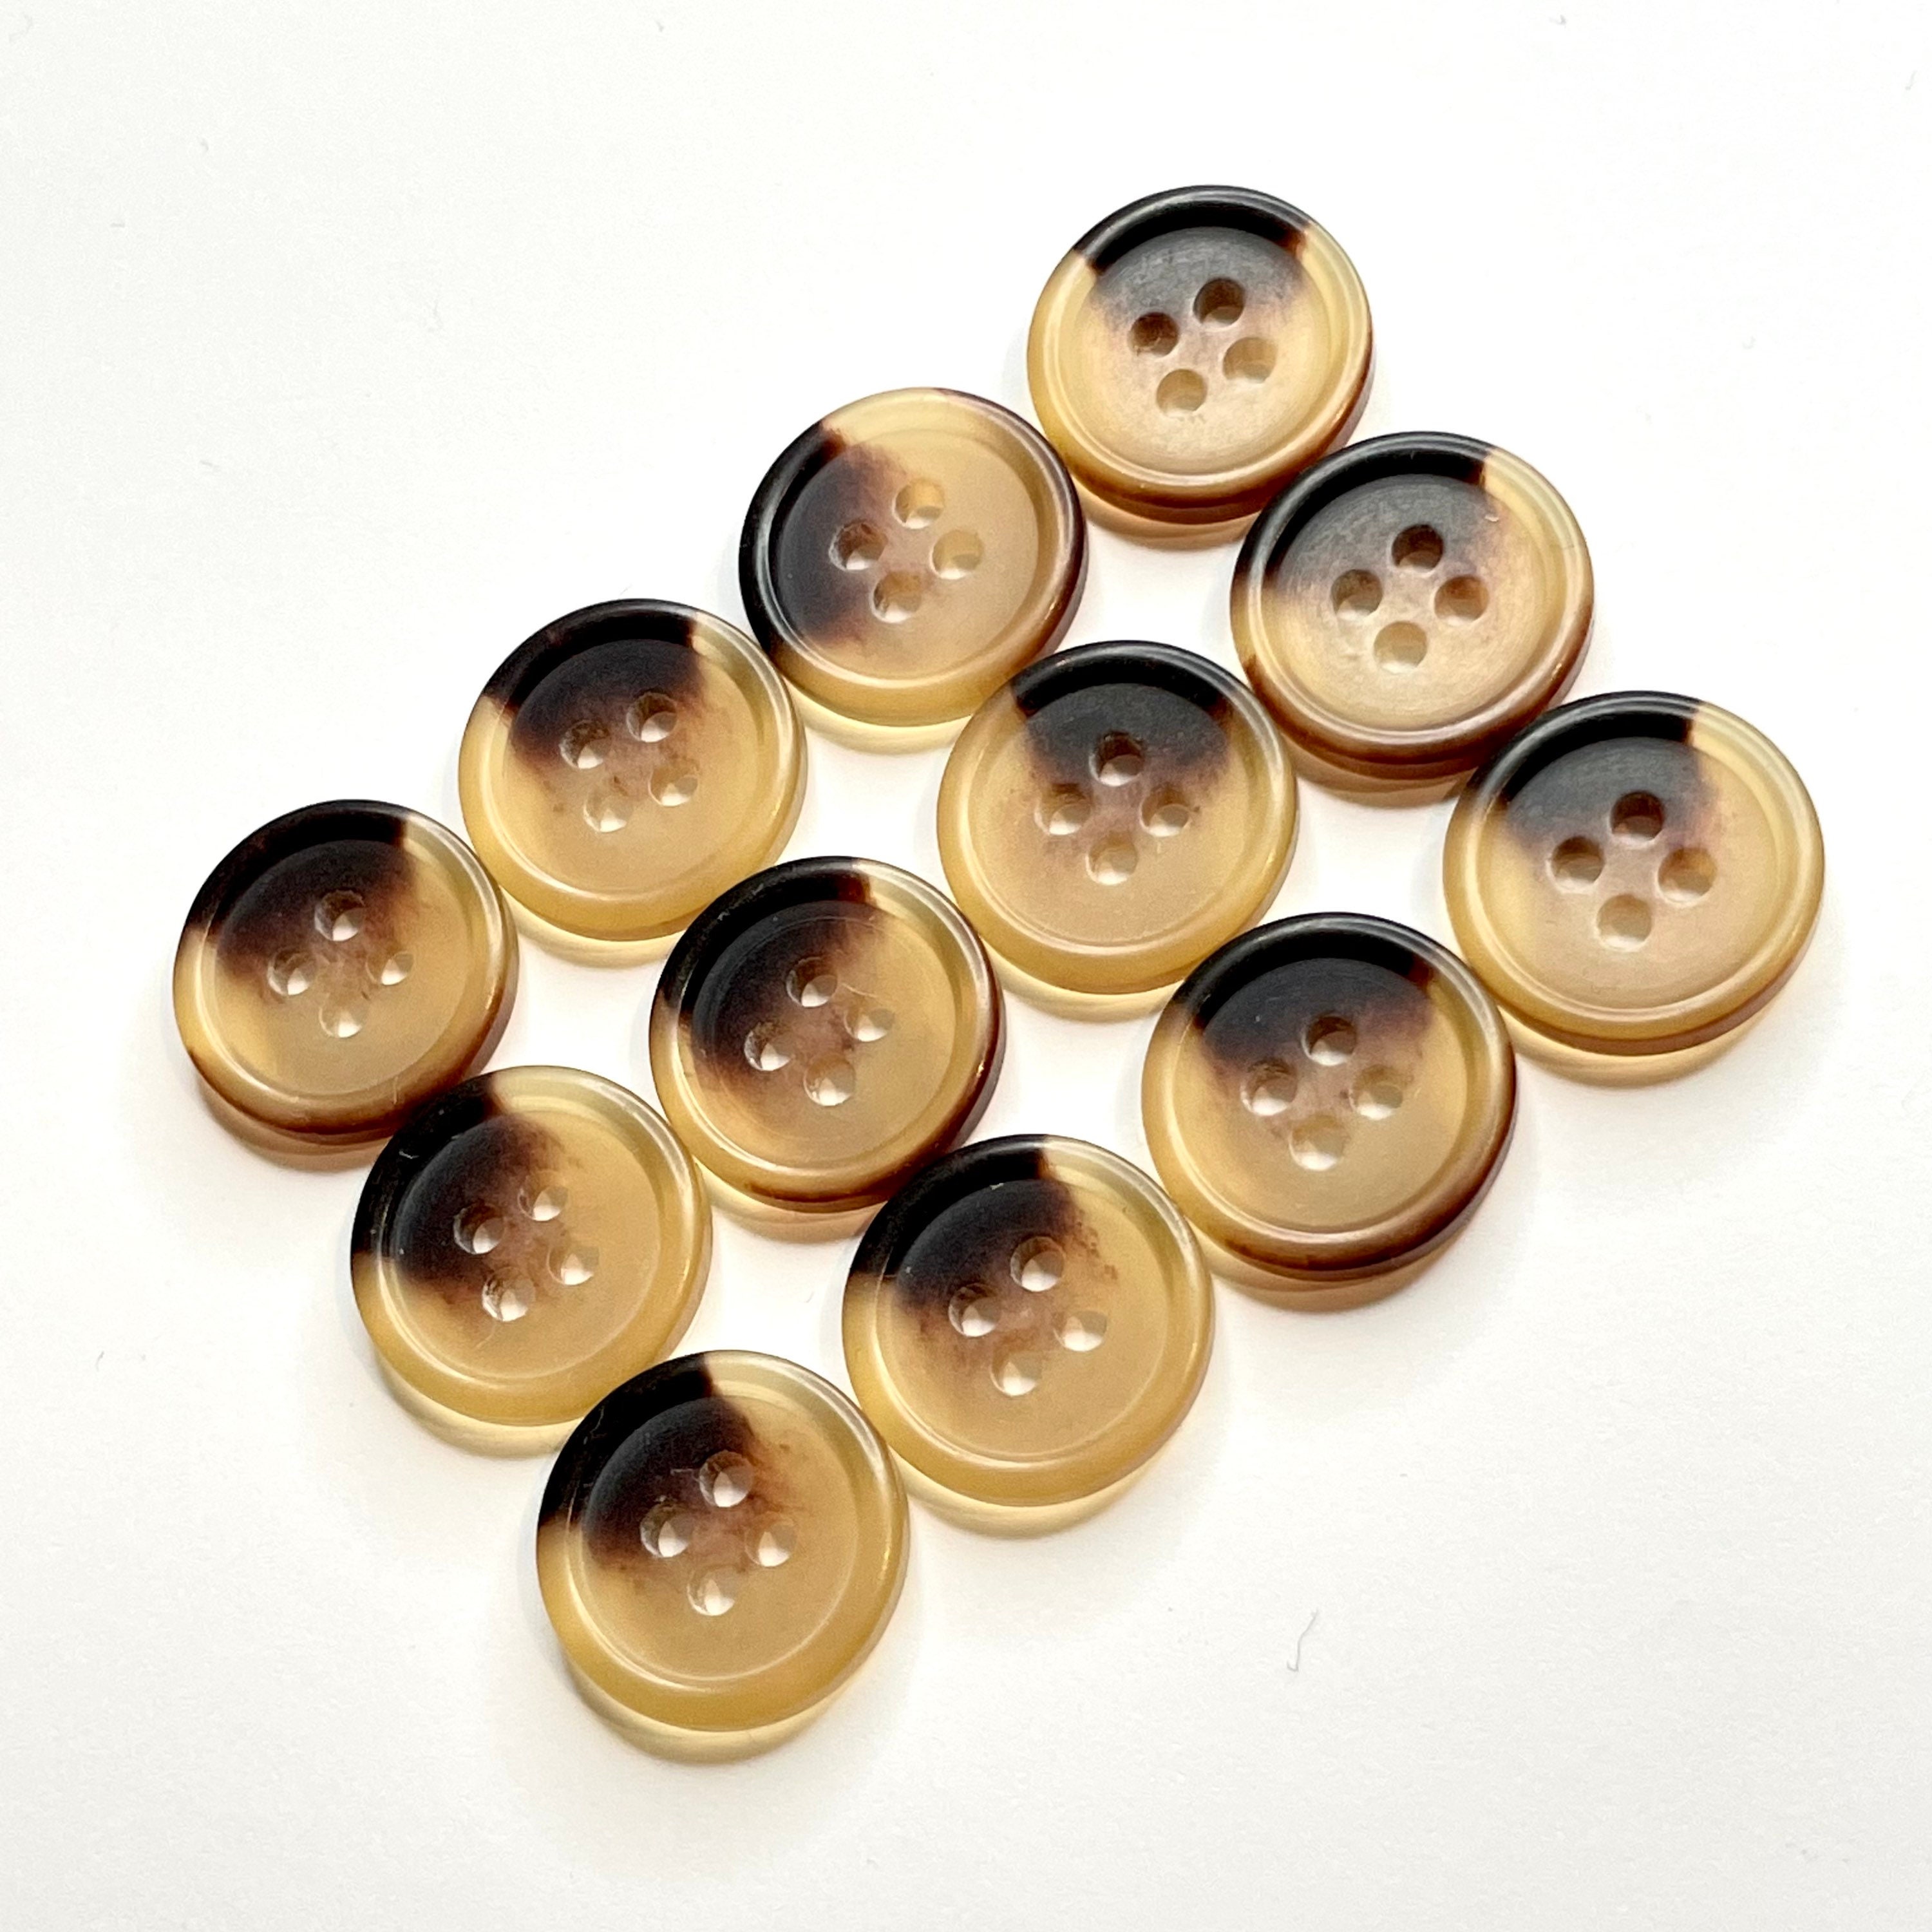 16MM 12 or 24 Vintage Brown Caramel Buttons for Knitting Sewing 4hole ...